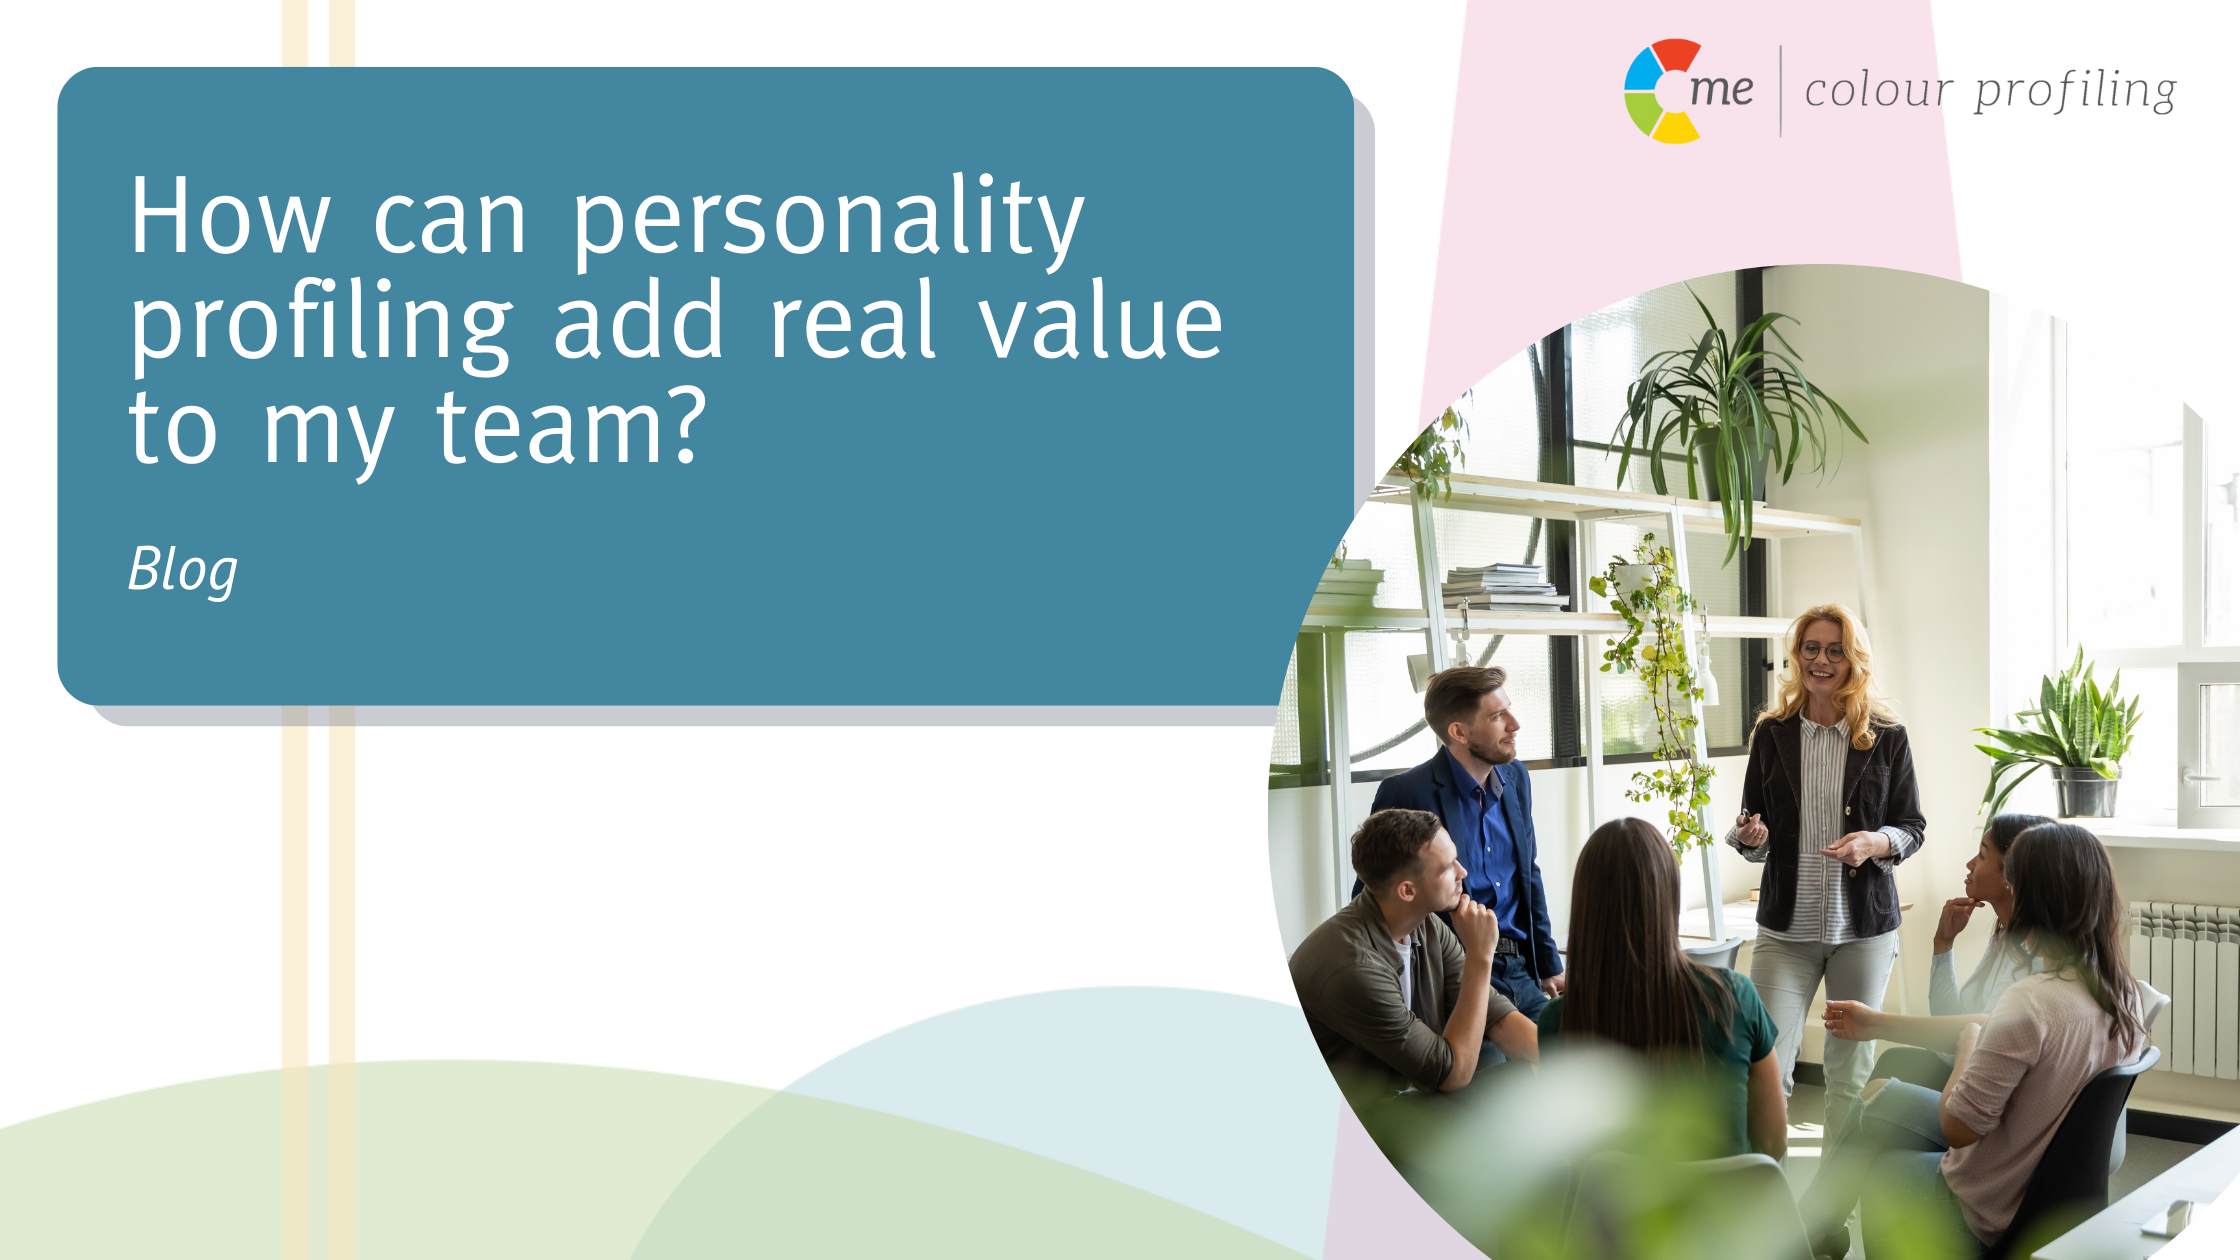 How can personality profiling add real value to my team?